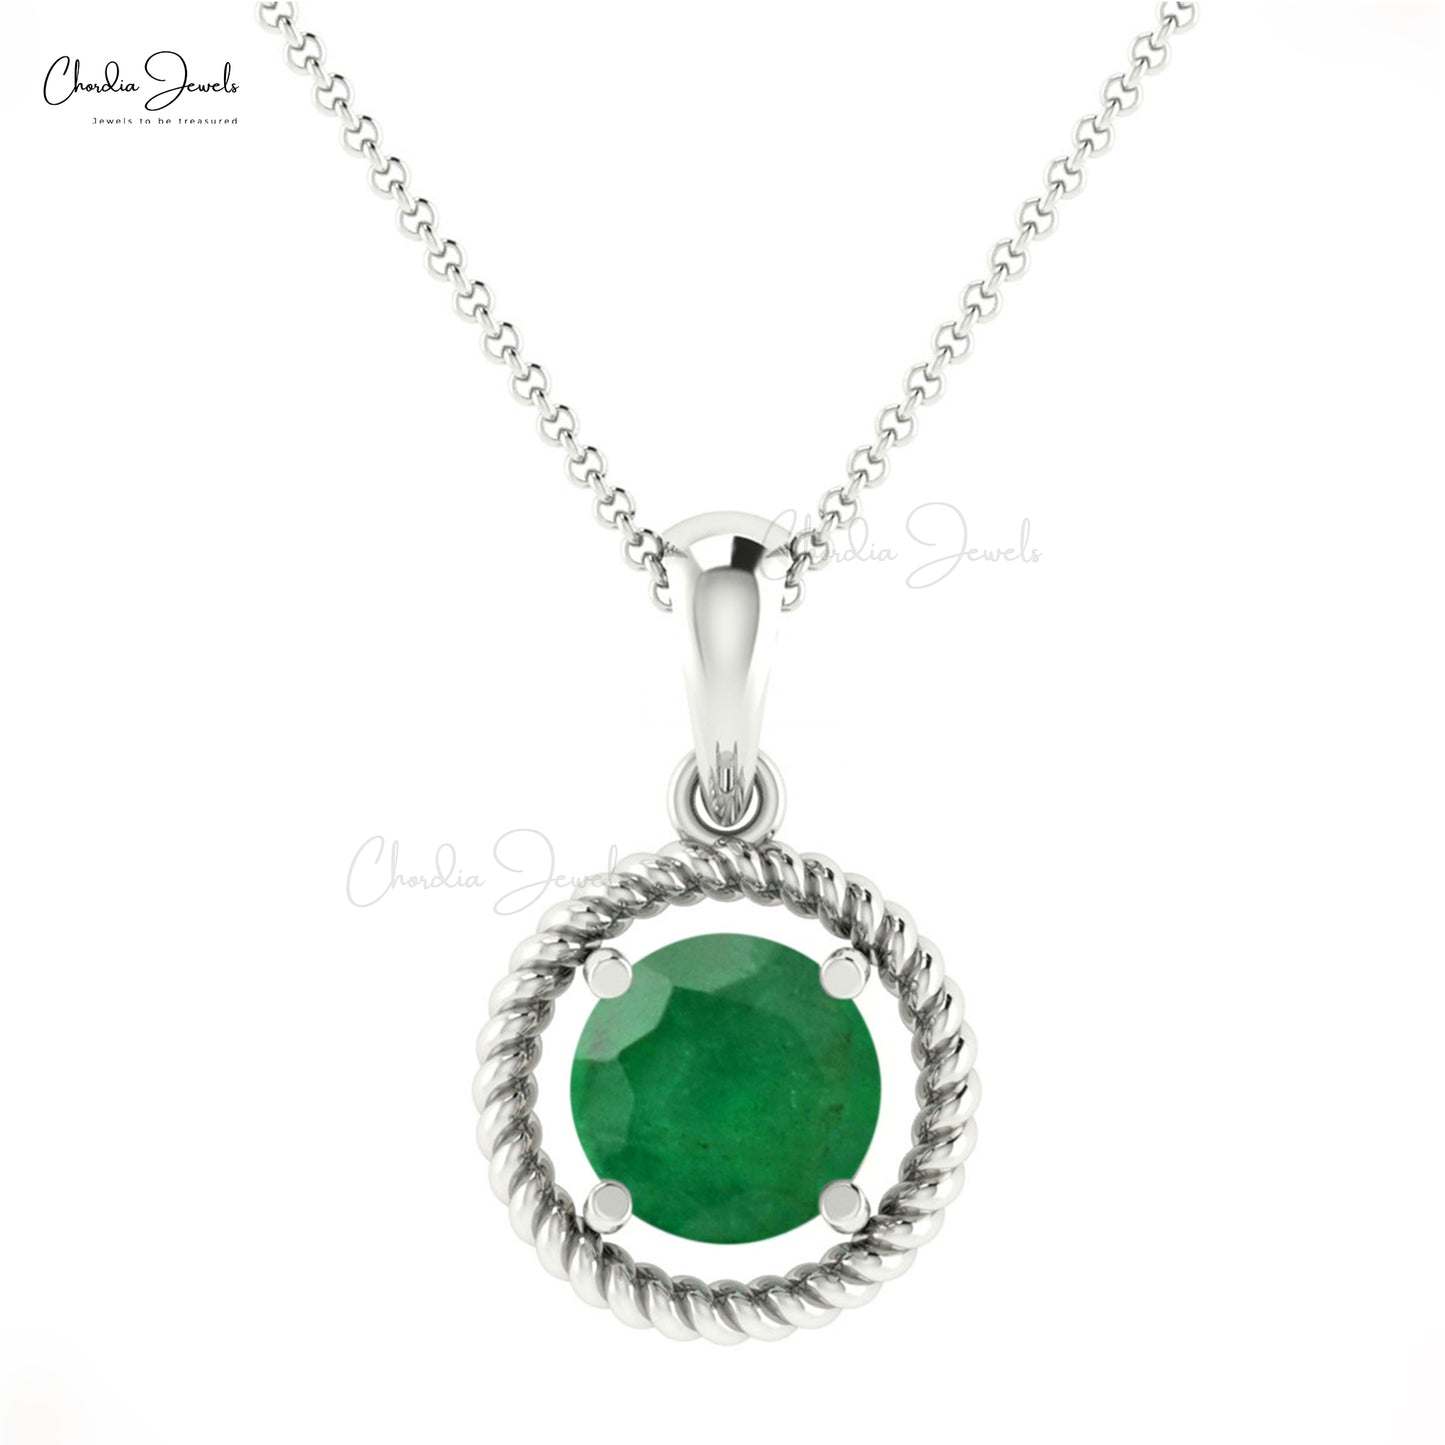 Solitaire Spiral Pendant With Genuine Emerald 14K Solid Gold Prong Set Pendant For Wife